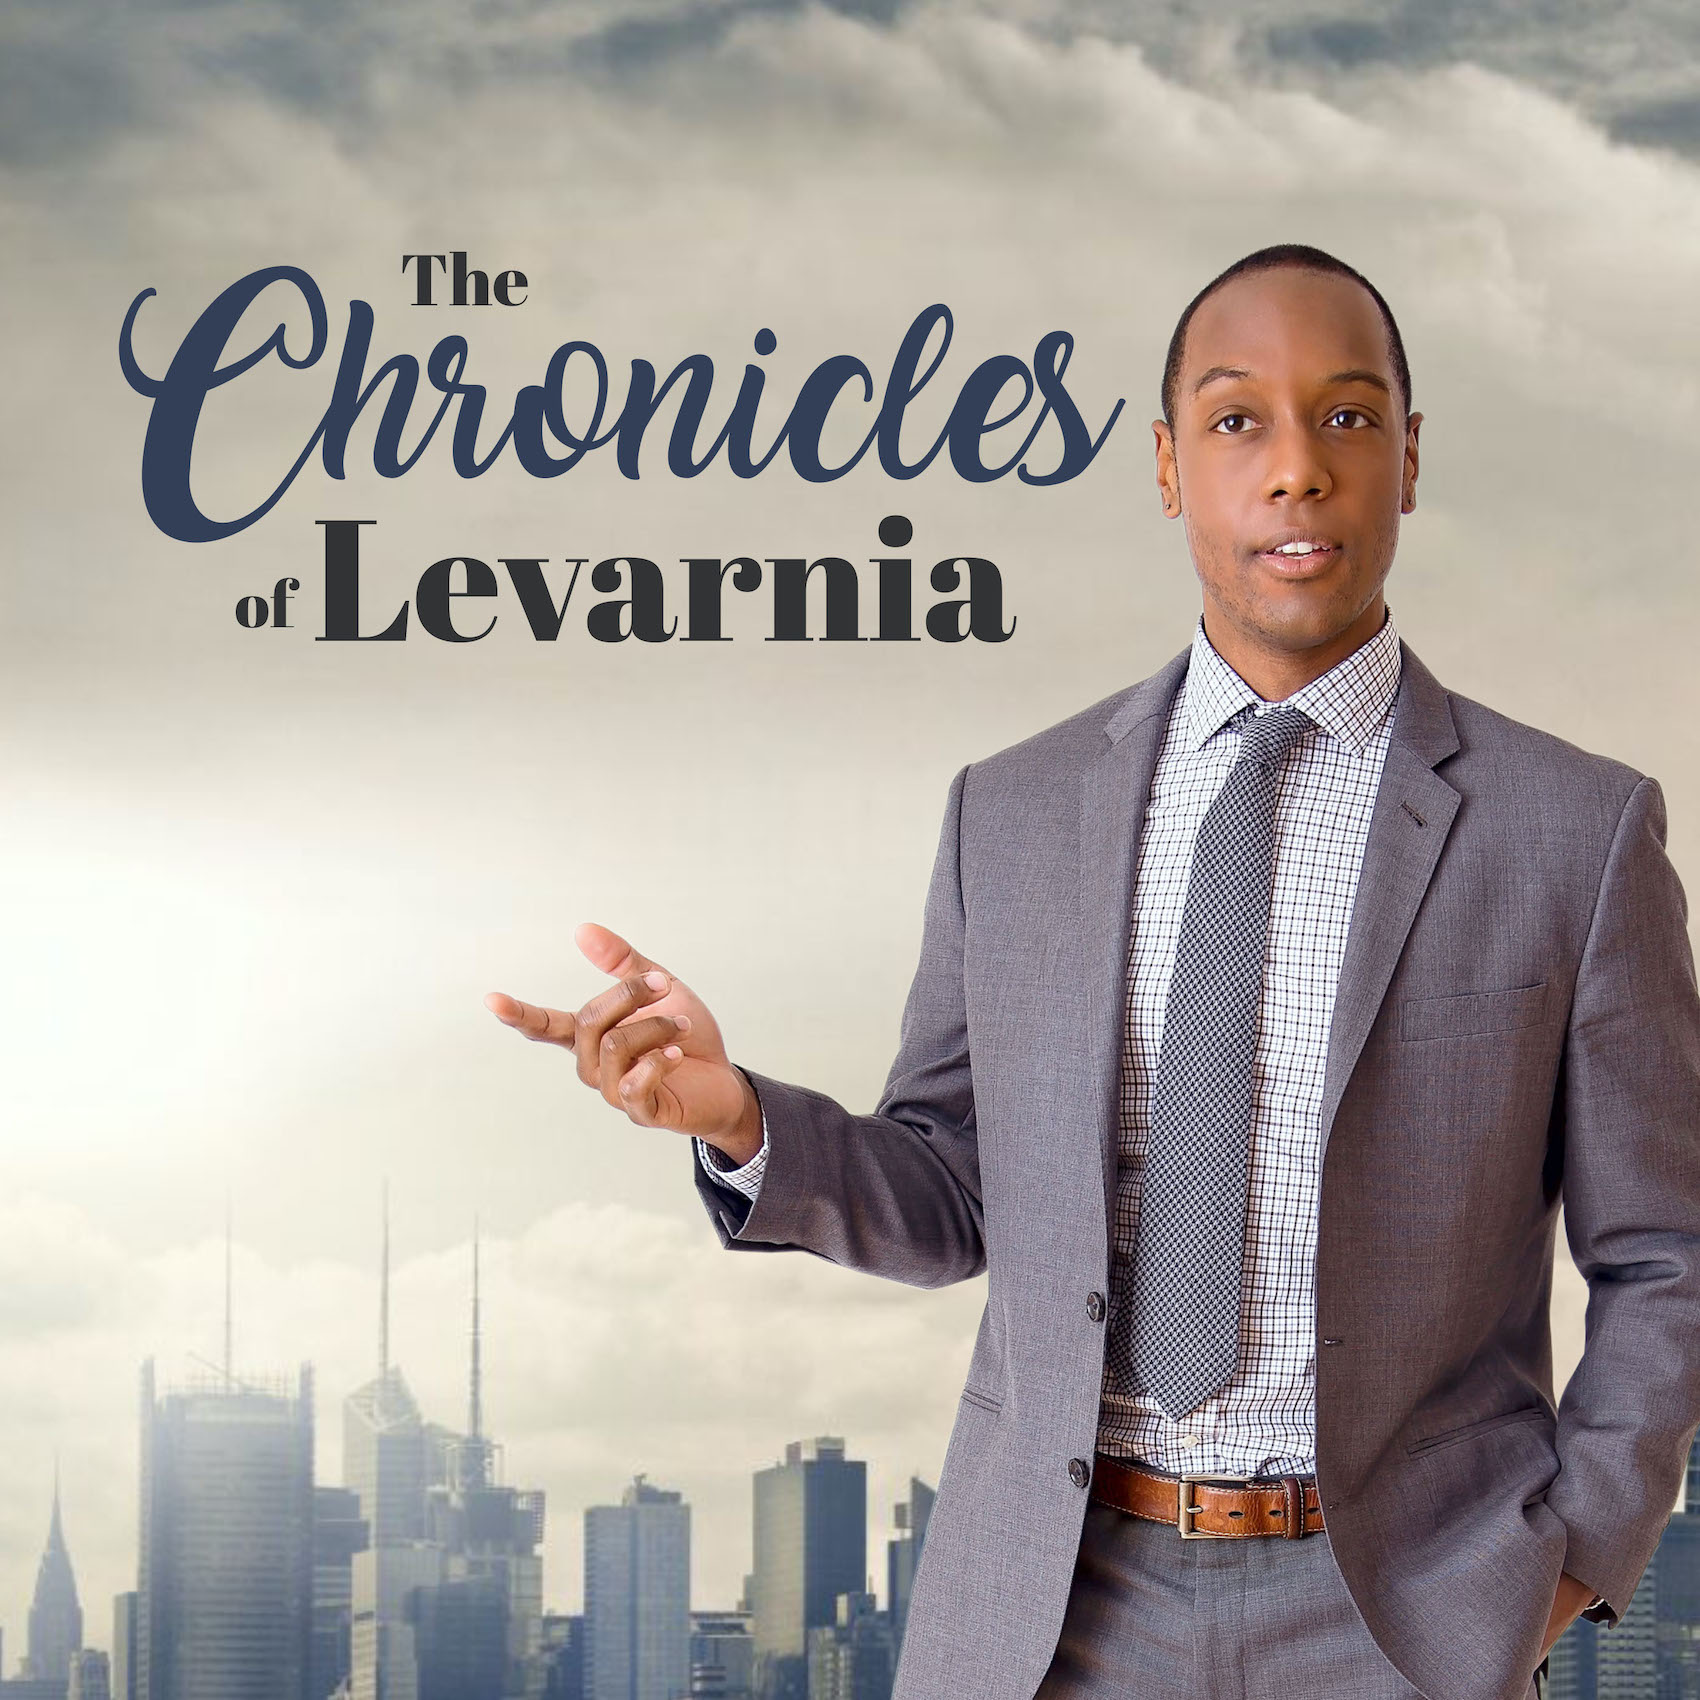 Artwork for The Chronicles of Levarnia